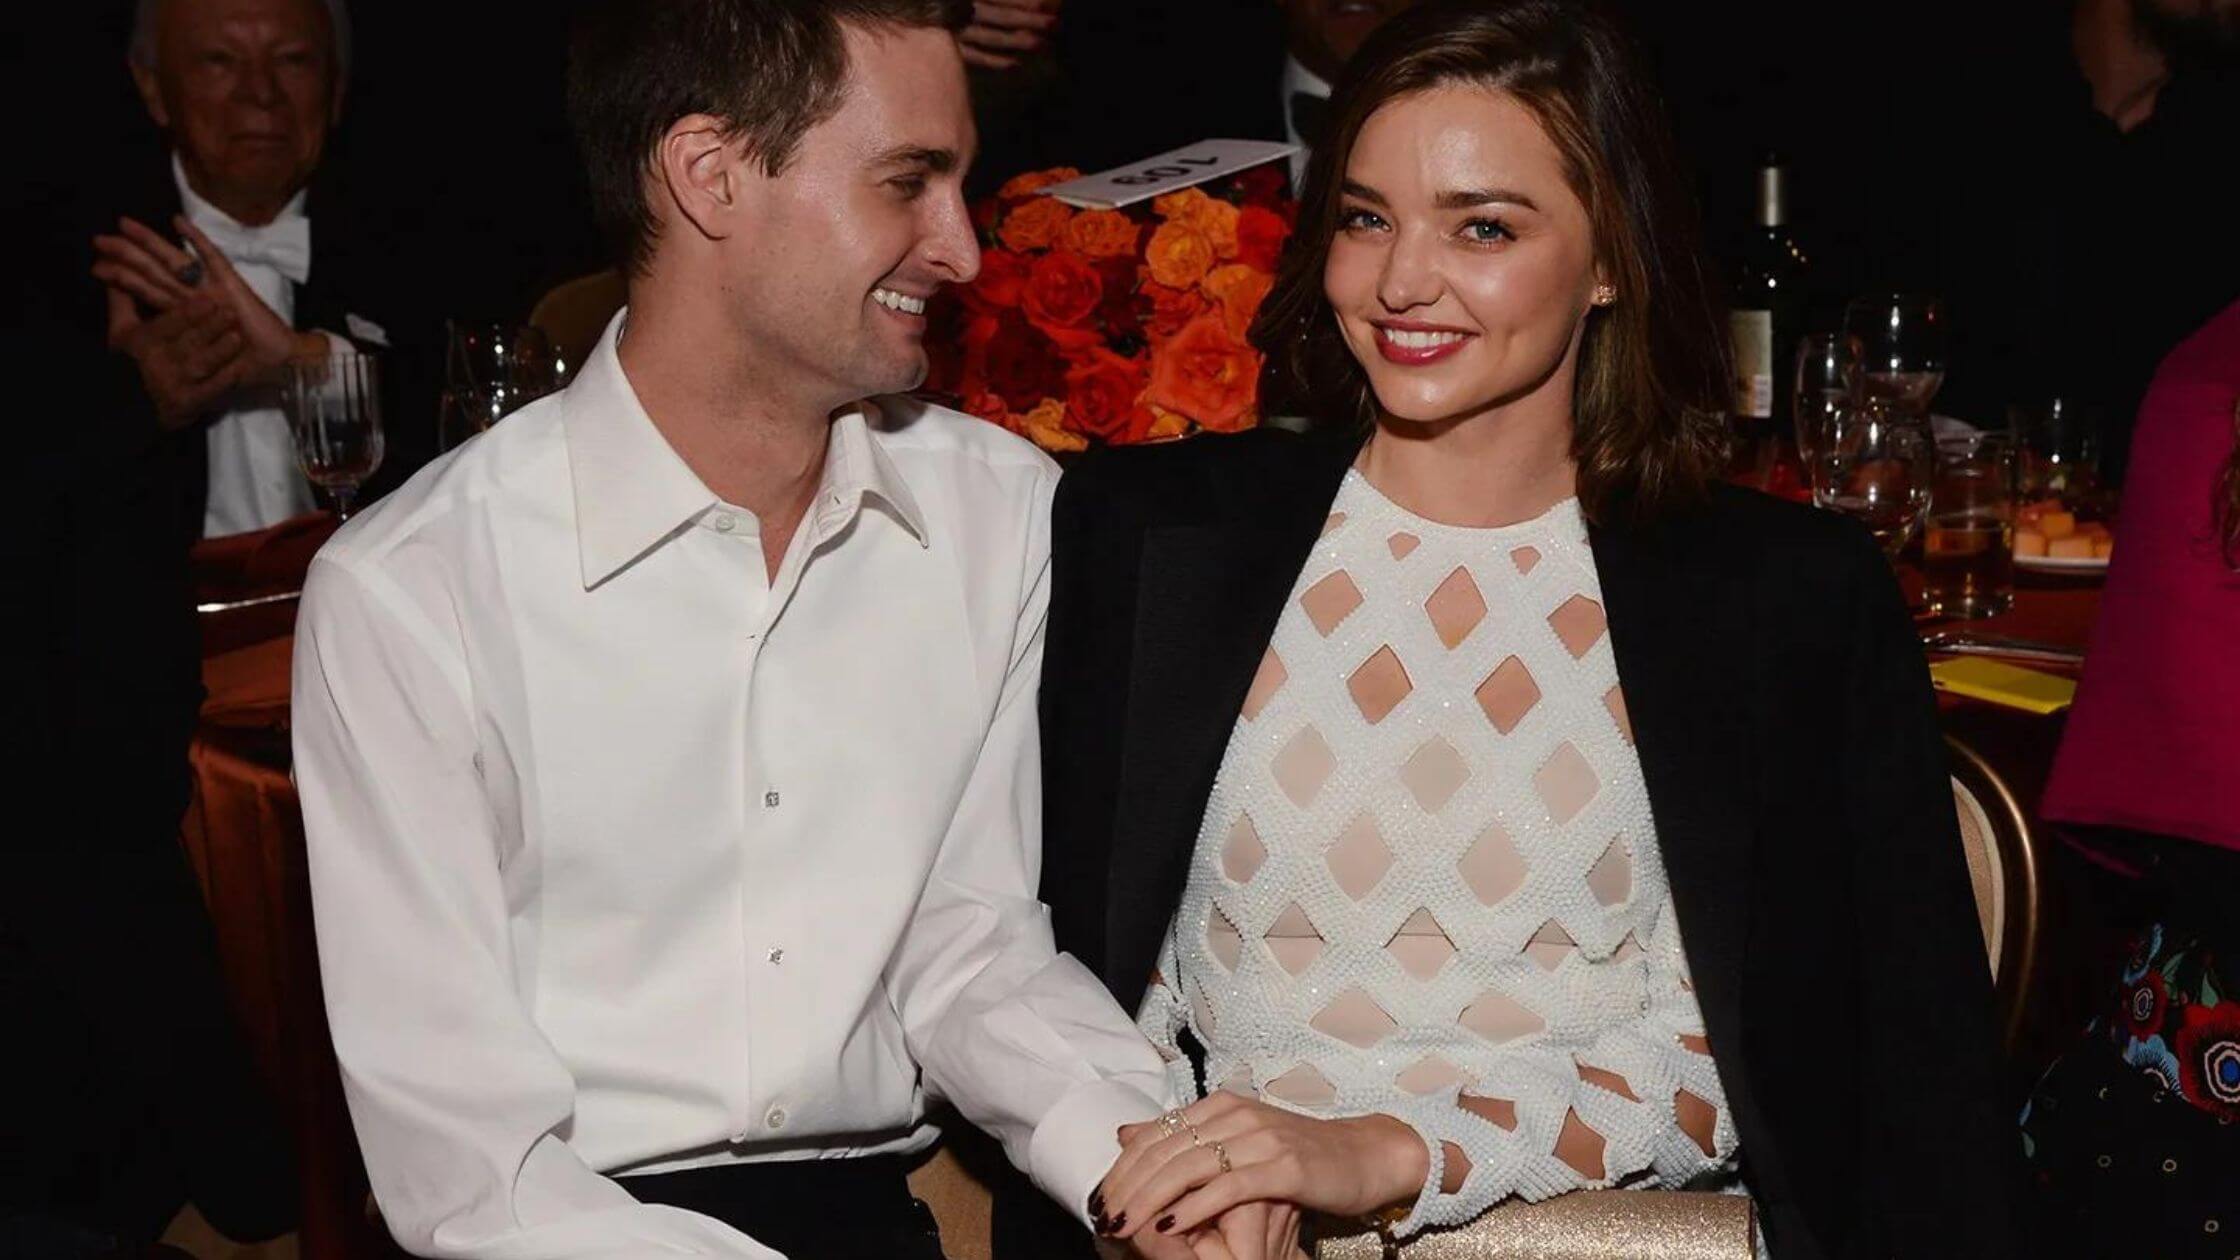 The 'Healthy' Influence Of Miranda Kerr On Her Husband The CEO Of Snapchat, Evan Spiegel!